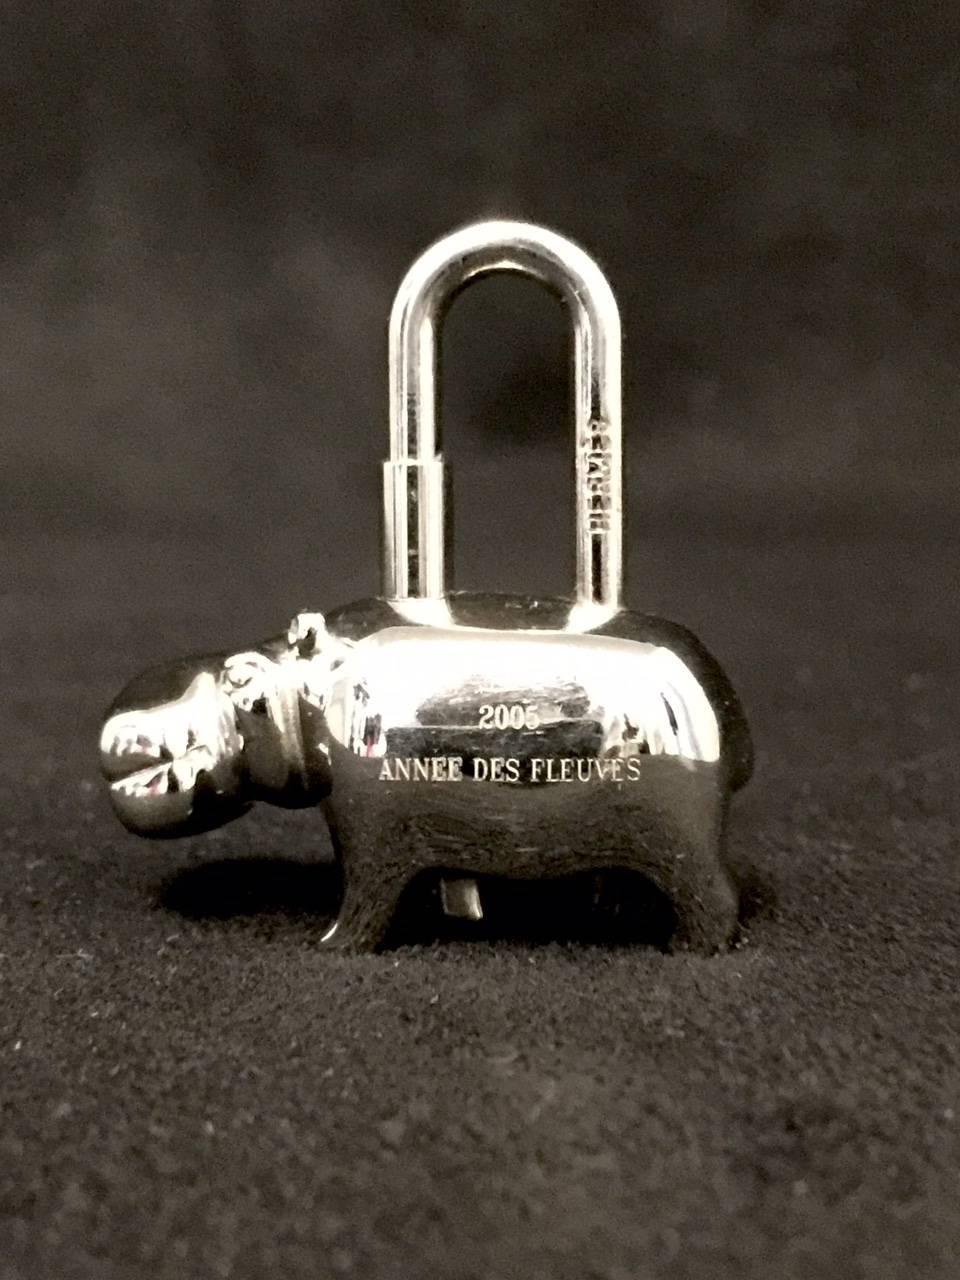 Hermes honored and celebrated the rivers of Africa with this silver tone hippopotamus cadena.  Upgrade and personalize a favorite Hermes bag or simply wear as a pendant on a chain.  A highly collectible piece worthy of any 